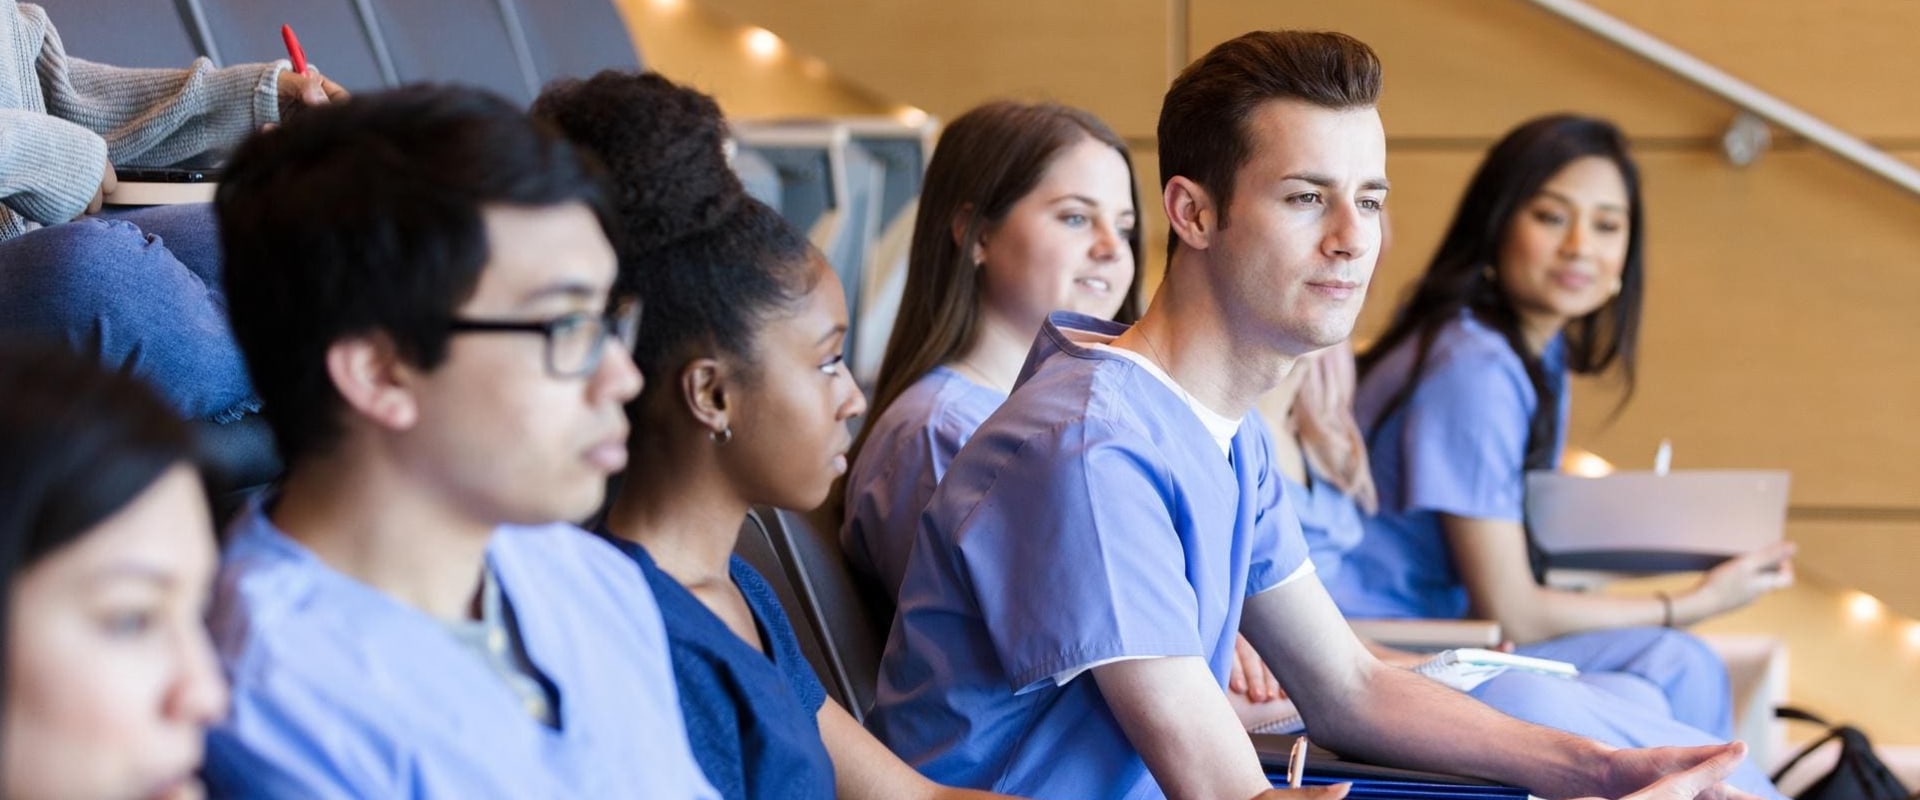 Special Requirements for International Medical Students: A Guide for Aspiring Doctors